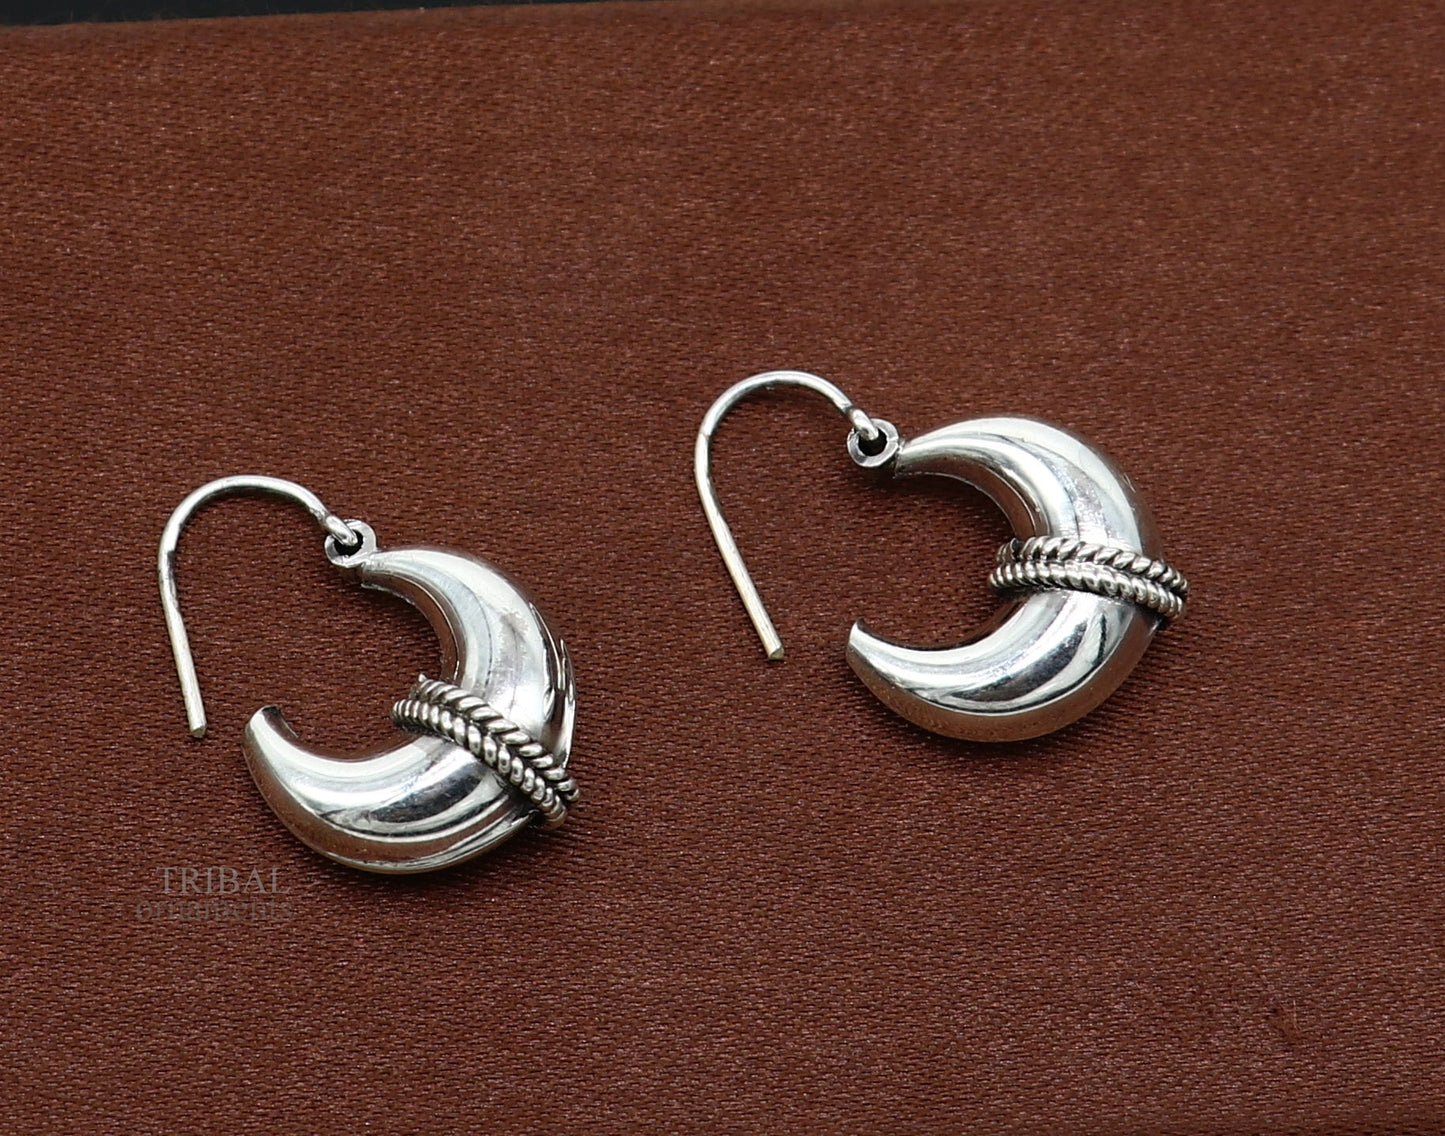 Vintage Design 925 sterling silver fabulous hoops earring, tribal kundal earring from Rajasthan India, best gifting unisex jewelry ear1048 - TRIBAL ORNAMENTS